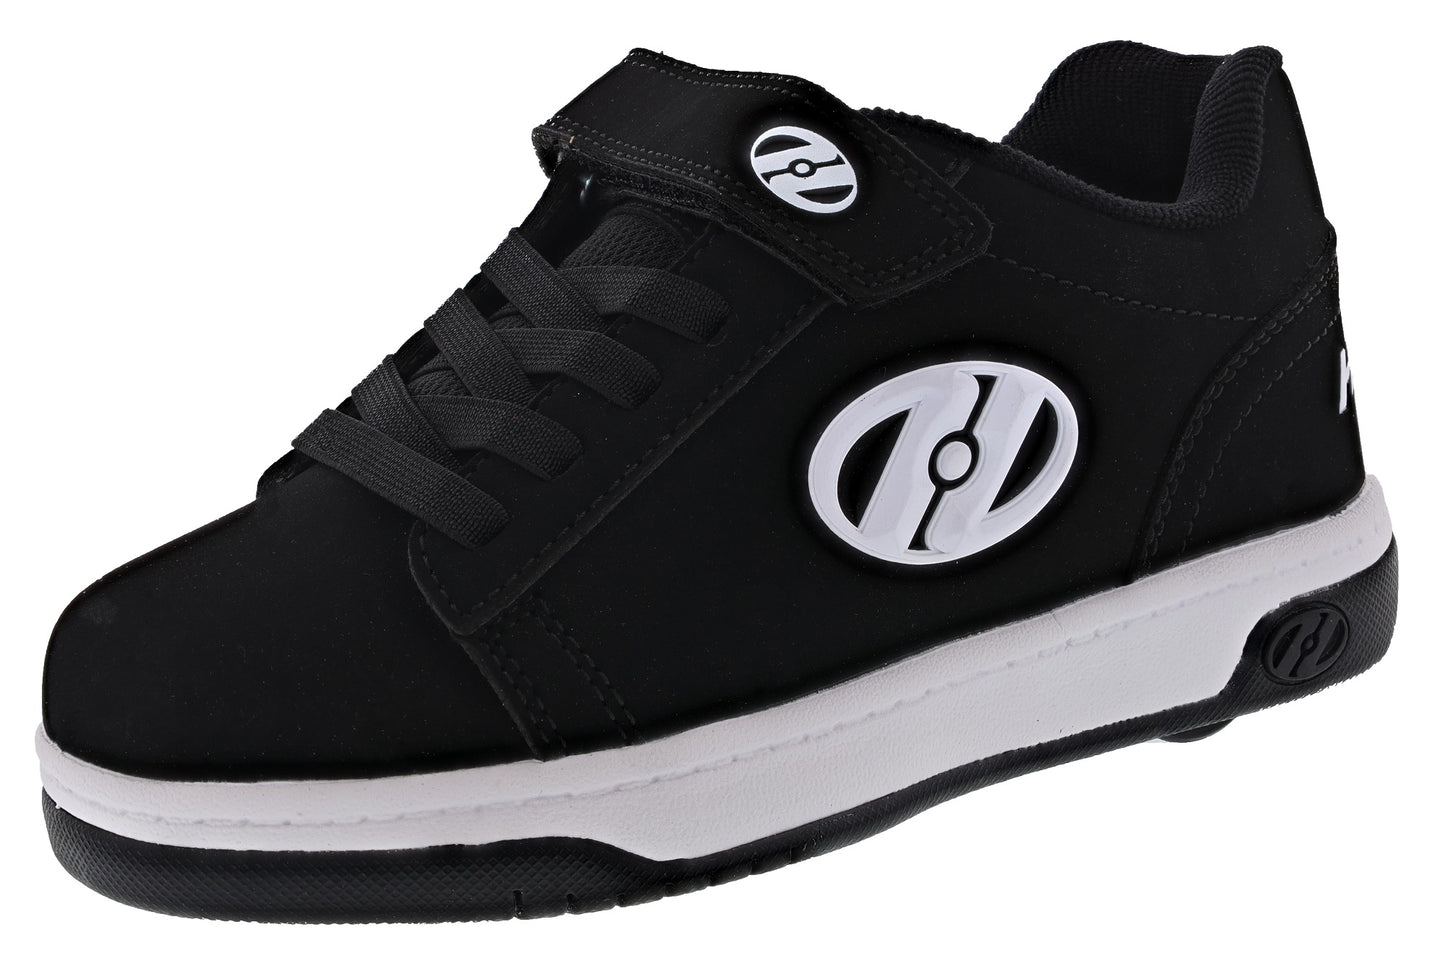 Skate Shoes with Wheels Online | Shoe